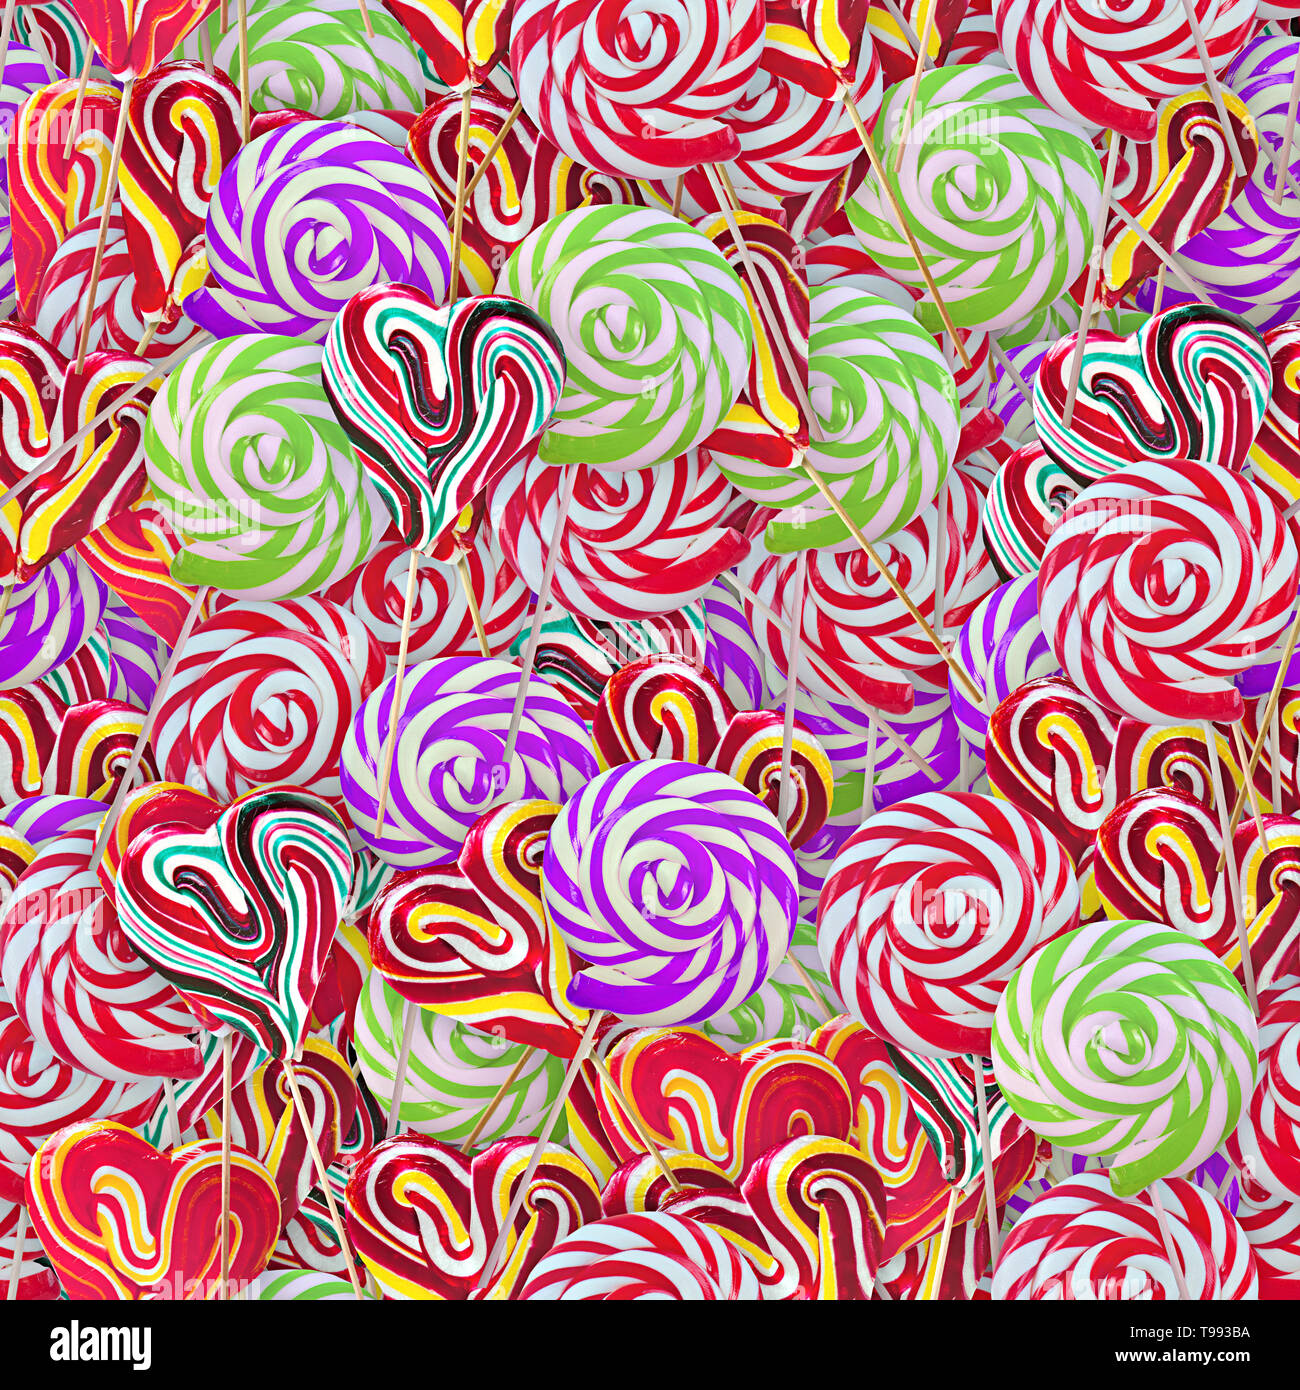 Candy Lollipops Seamless Texture Tile Stock Photo